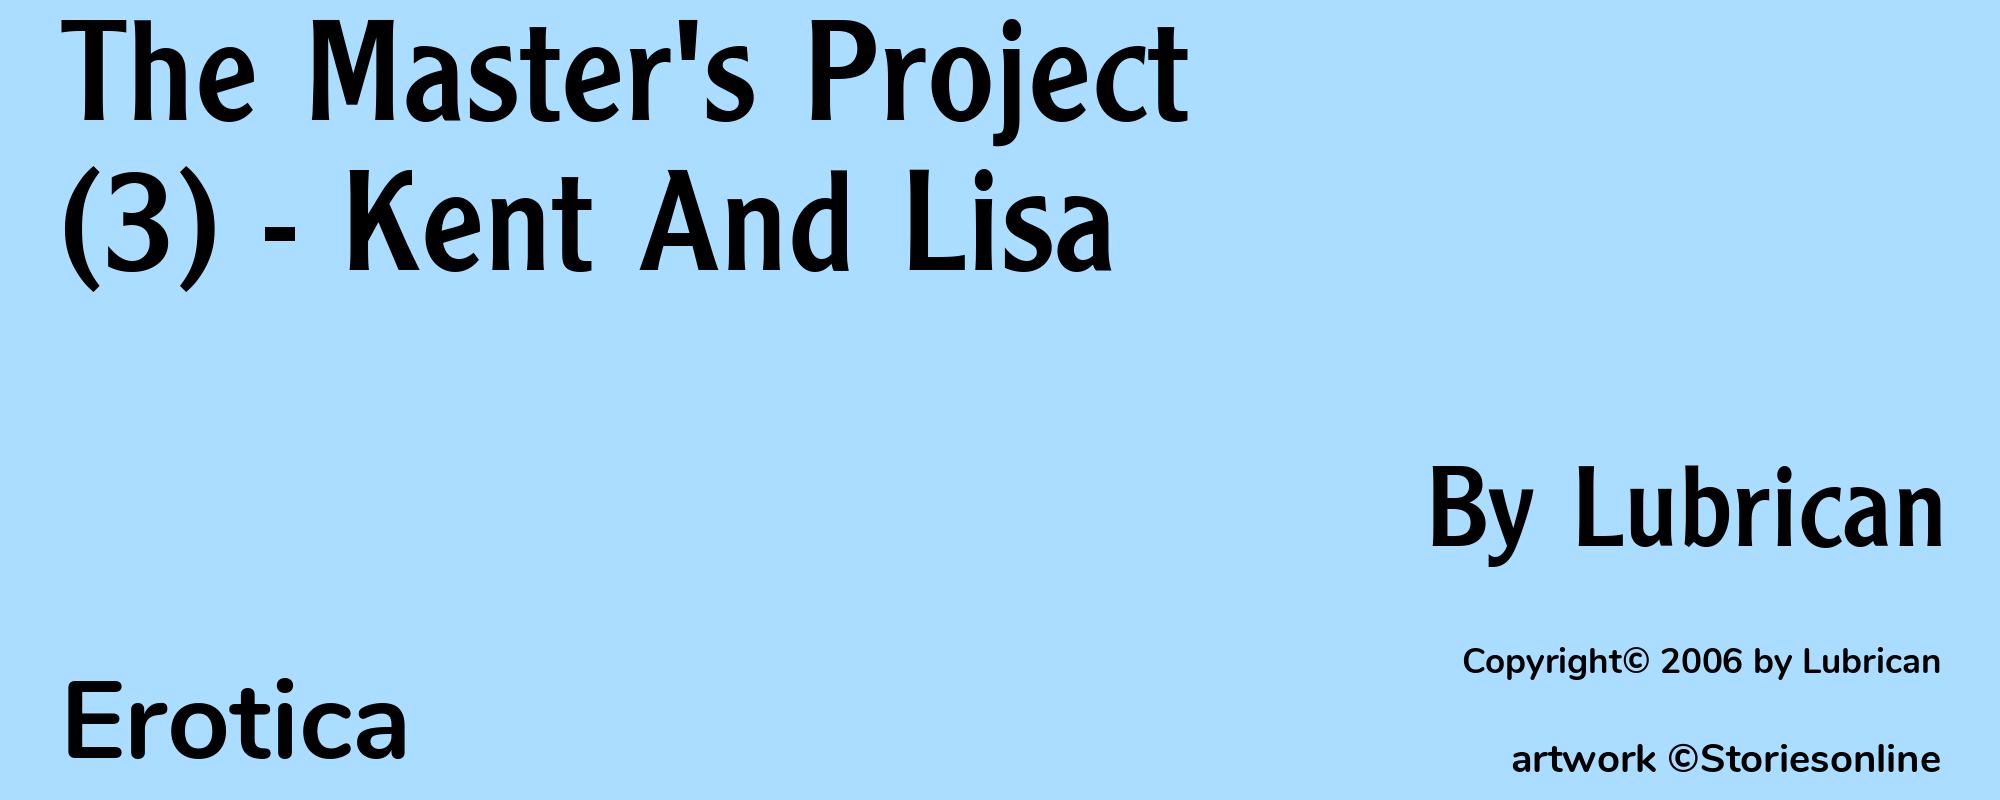 The Master's Project (3) - Kent And Lisa - Cover